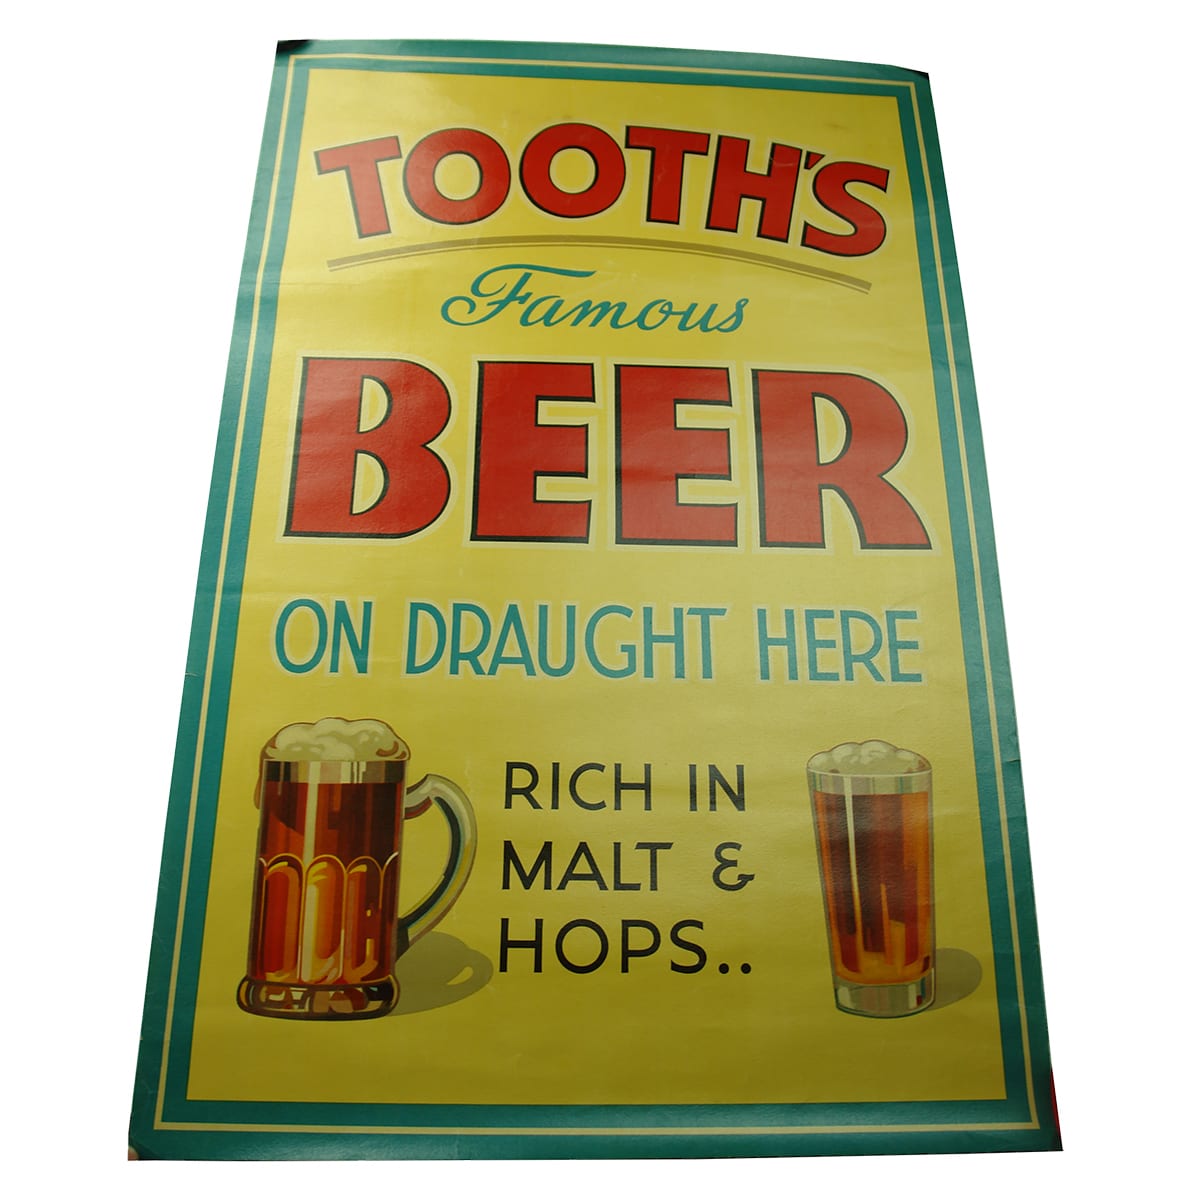 Beer Advertising Poster. Tooth's Famous Beer.